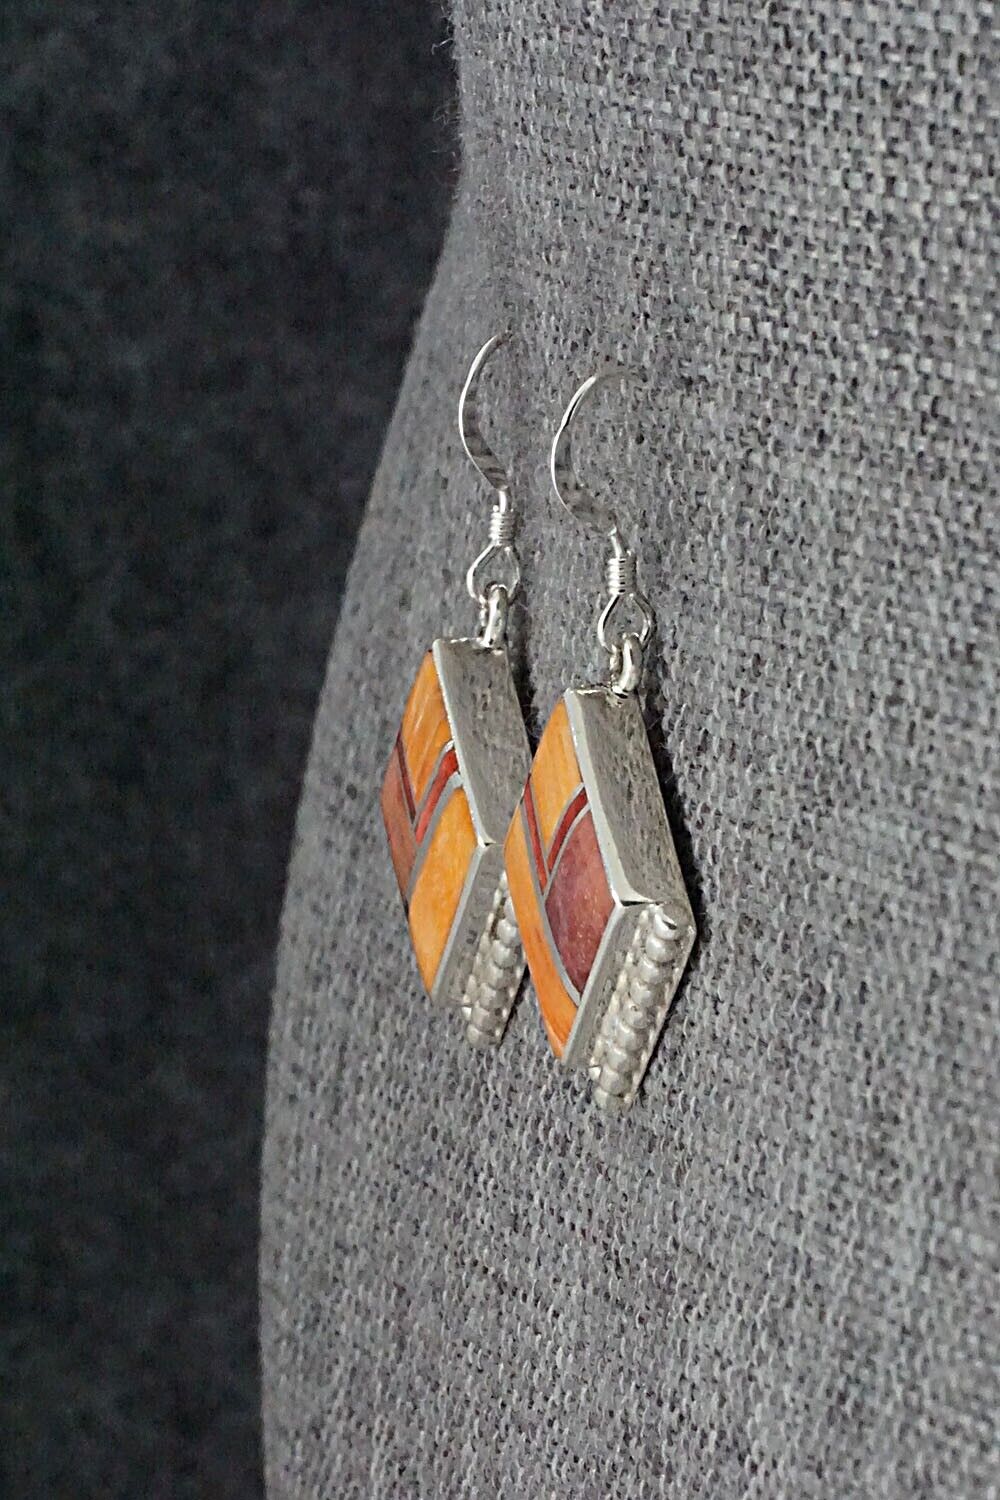 Spiny Oyster & Sterling Silver Inlay Earrings - James Manygoats